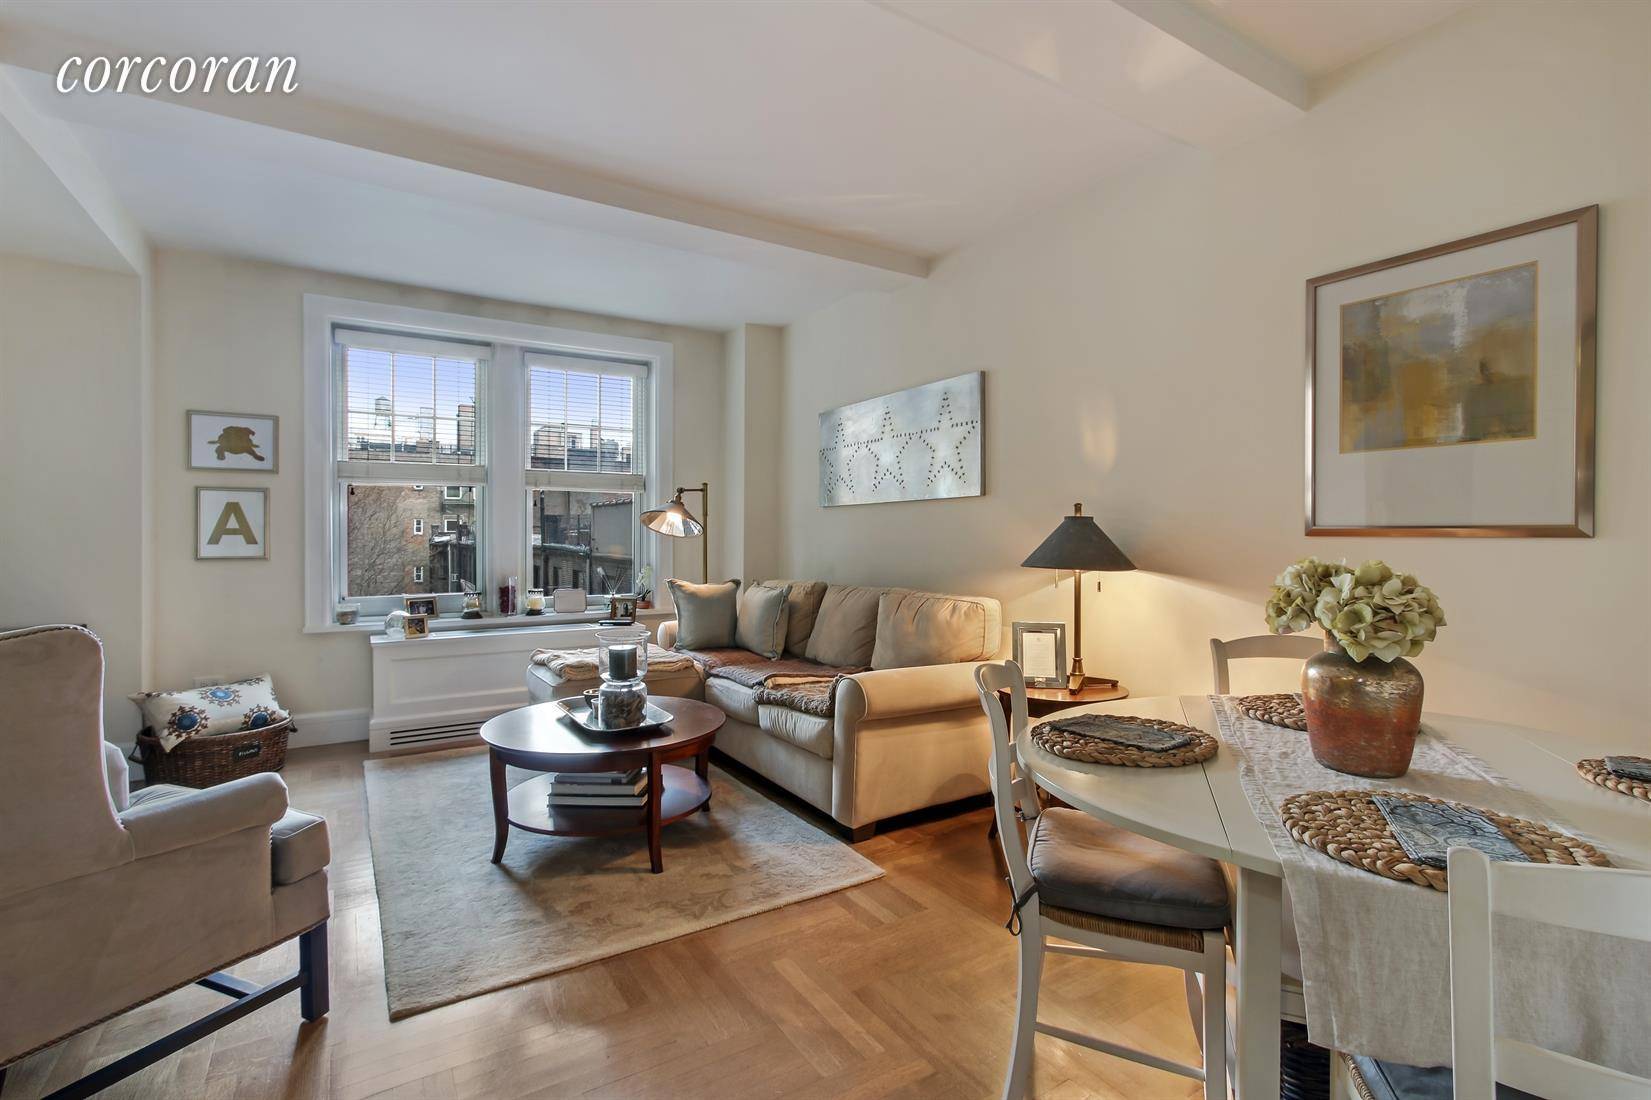 Pristine prewar one bedroom condo with tree top views 1 2 block from Central Park !